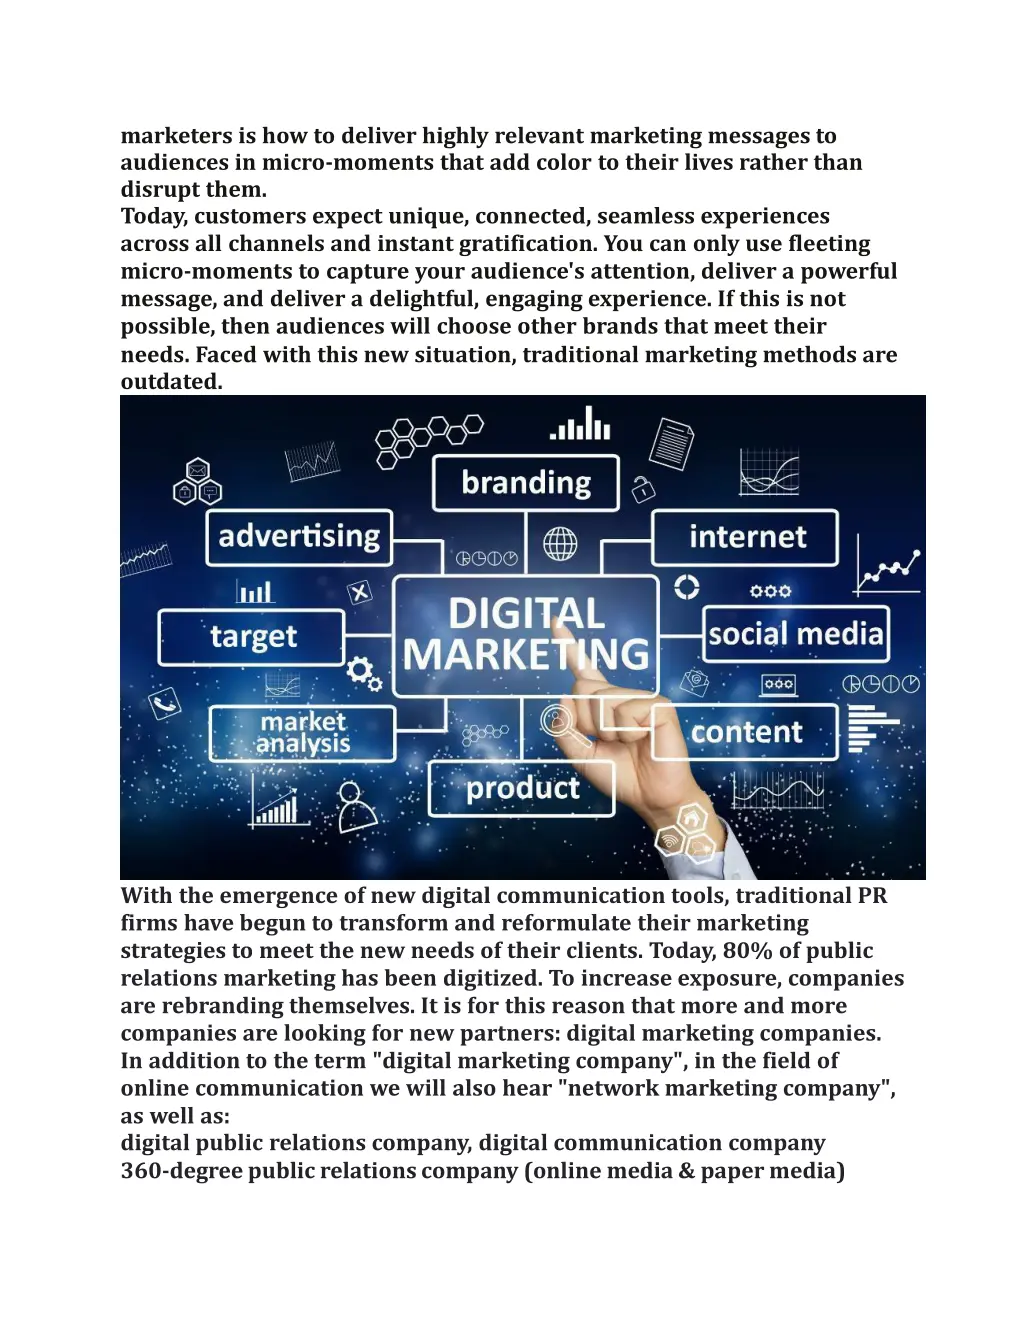 marketers is how to deliver highly relevant